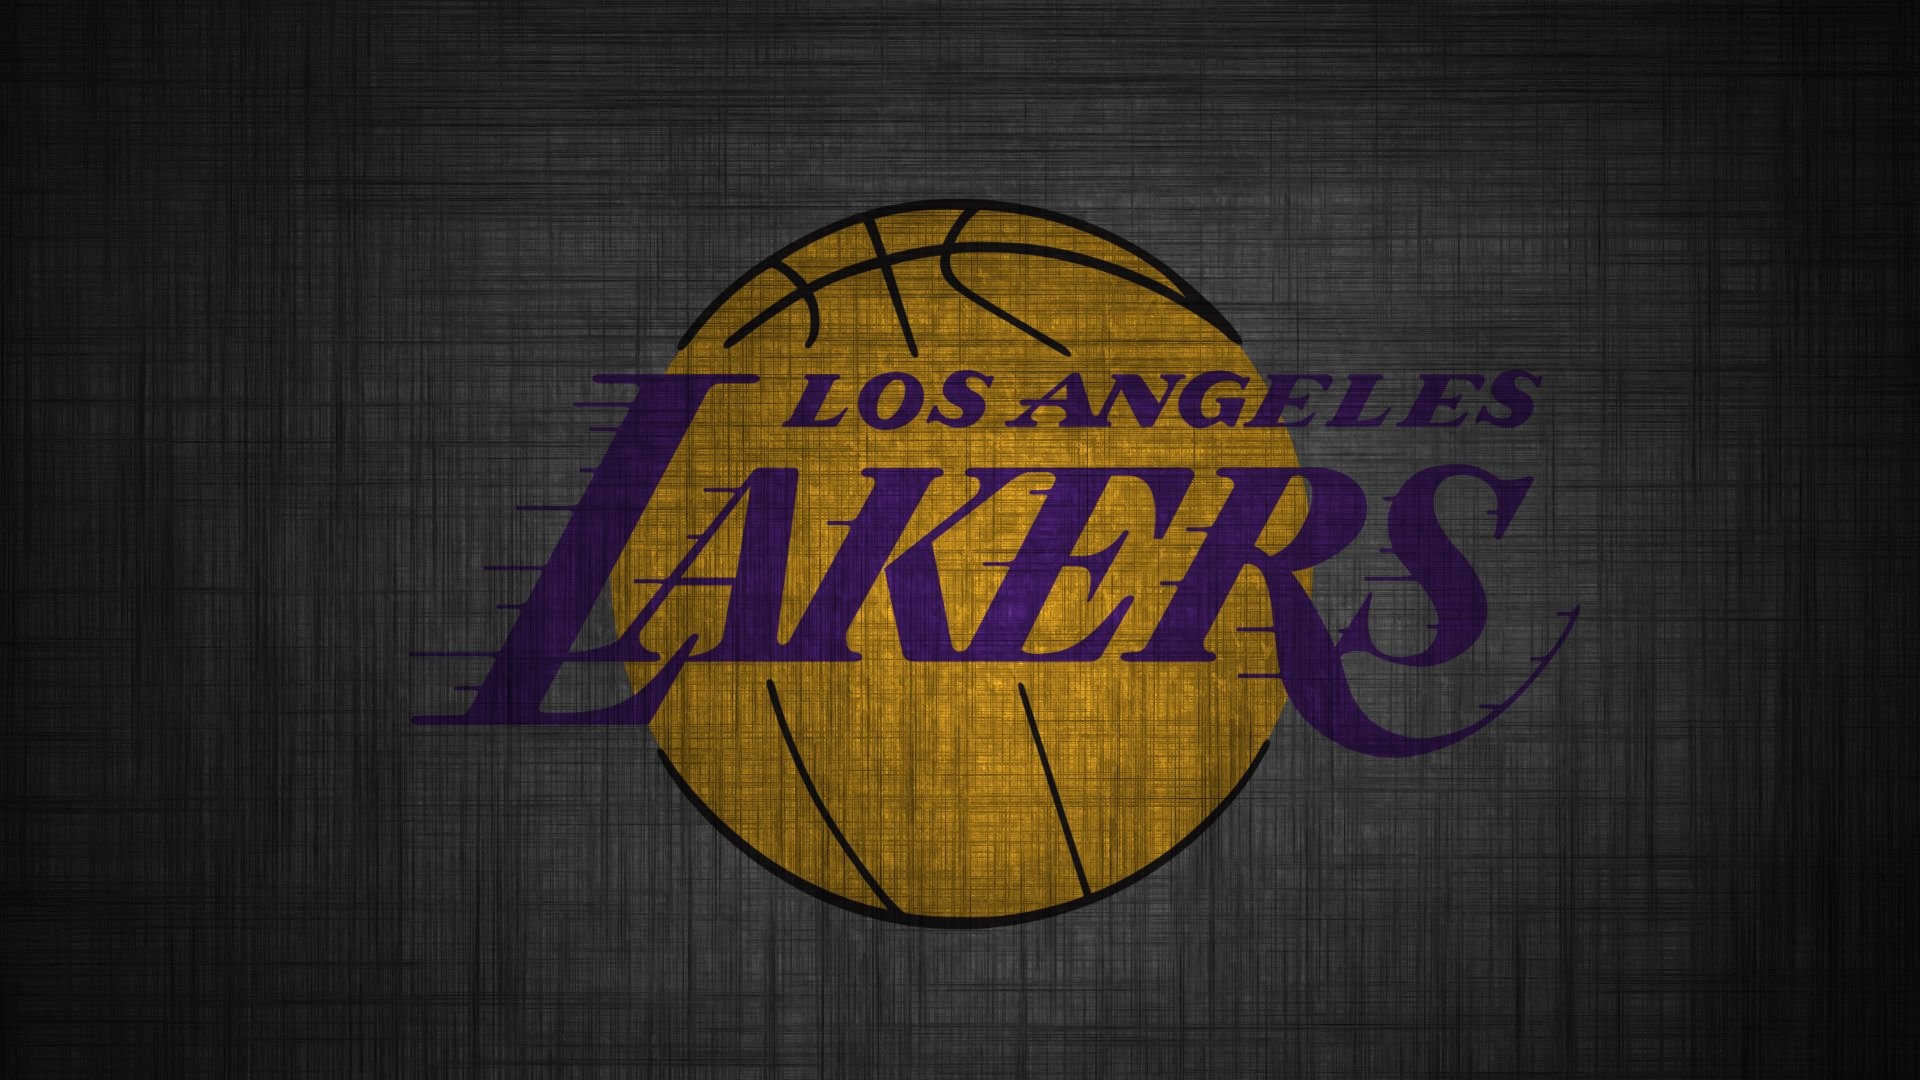 Lakers Wallpaper Images On - Angeles Lakers - HD Wallpaper 